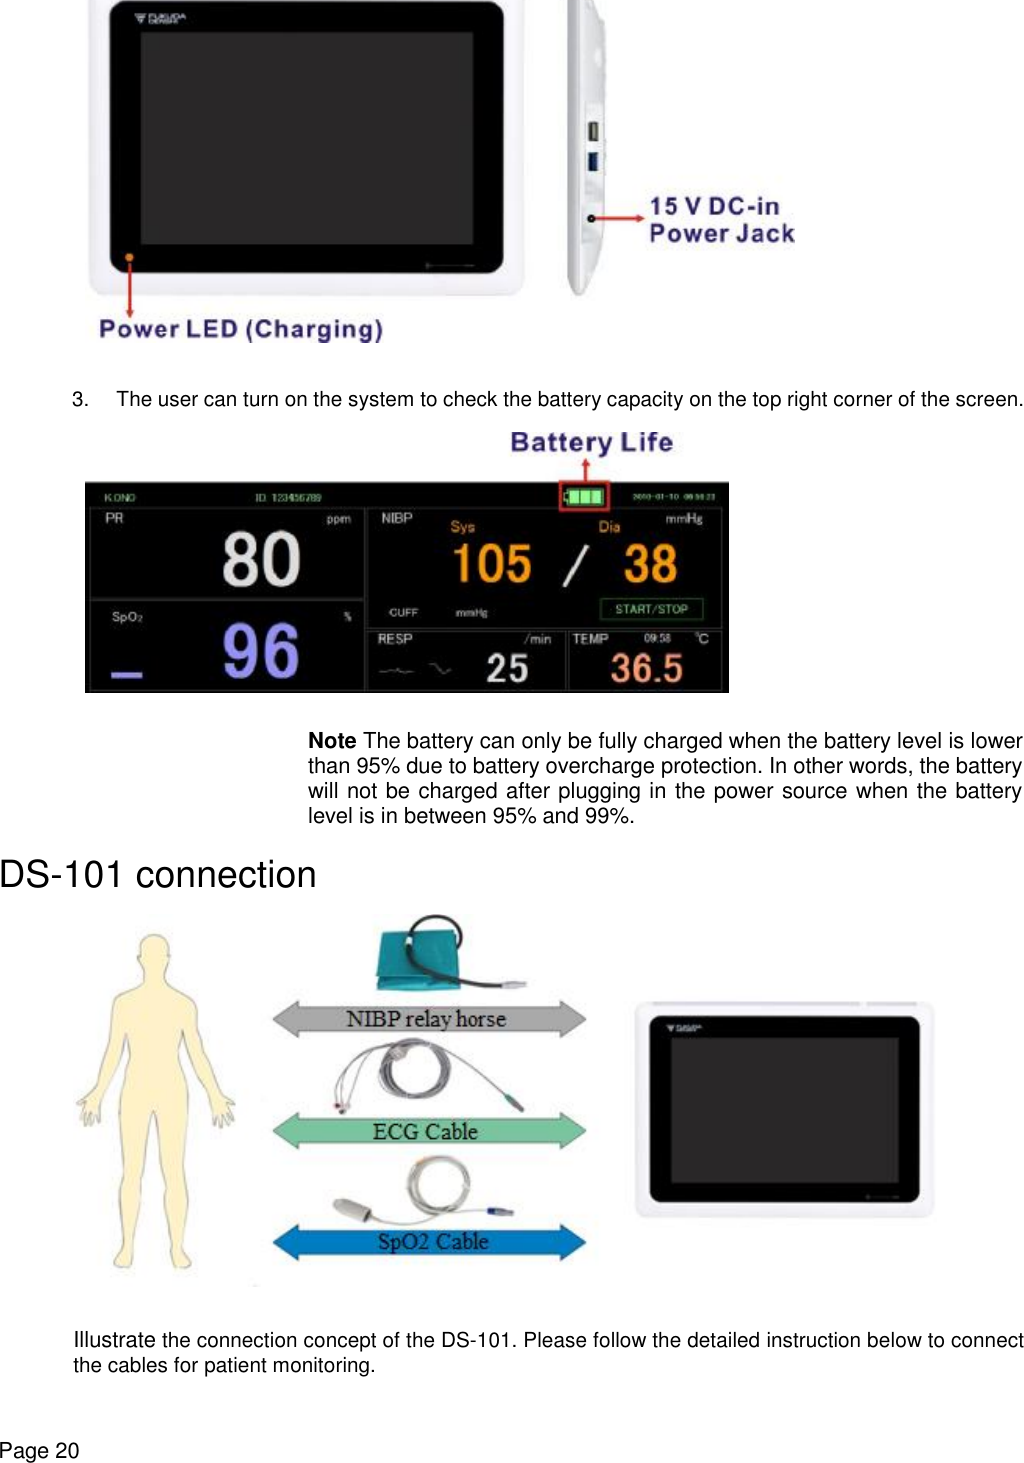    Page 20   3. The user can turn on the system to check the battery capacity on the top right corner of the screen.   Note The battery can only be fully charged when the battery level is lower than 95% due to battery overcharge protection. In other words, the battery will not be charged after plugging in the power source when the battery level is in between 95% and 99%. DS-101 connection   Illustrate the connection concept of the DS-101. Please follow the detailed instruction below to connect the cables for patient monitoring. 